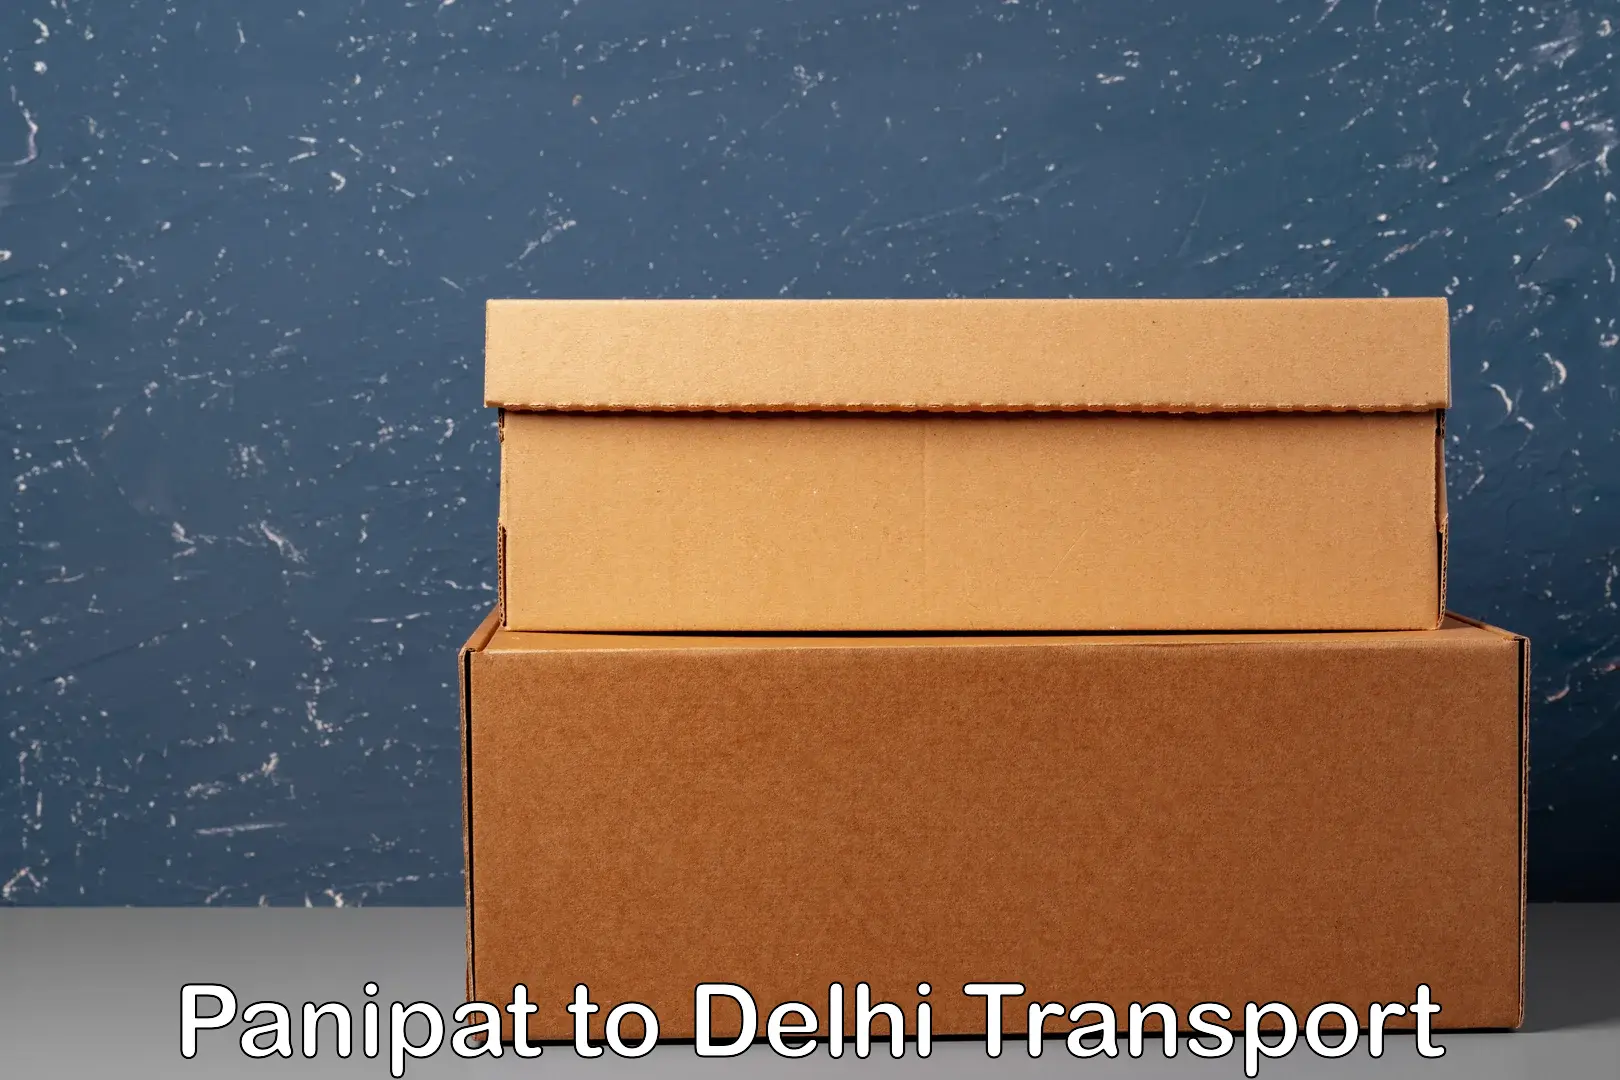 Truck transport companies in India Panipat to Lodhi Road